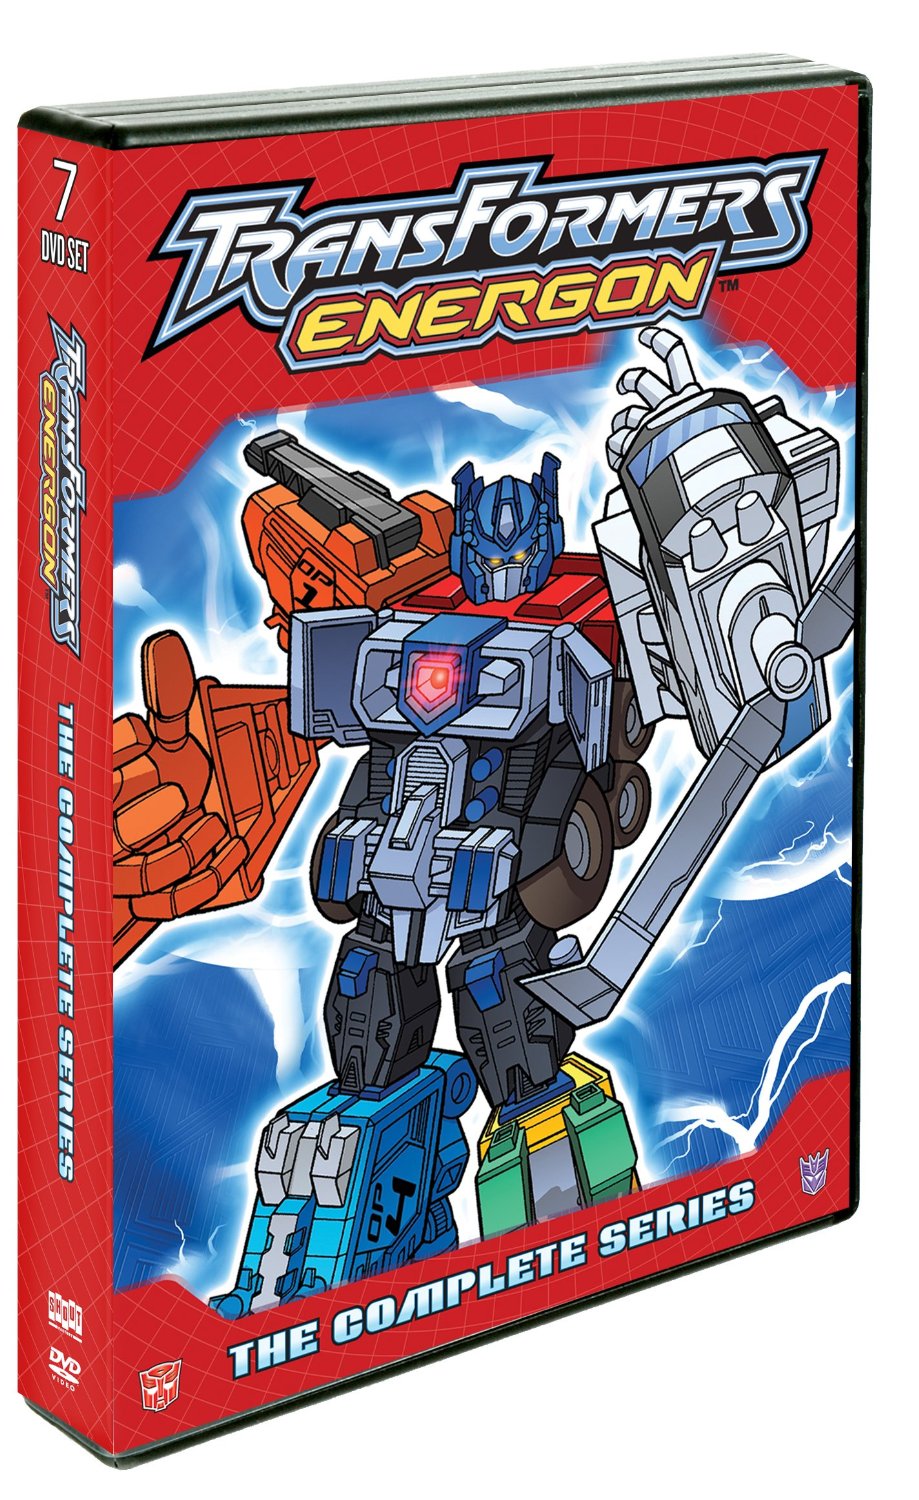 Transformers News: TRANSFORMERS ENERGON: The Complete Series 7-DVD set debuts on home entertainment shelves May 6, 2014